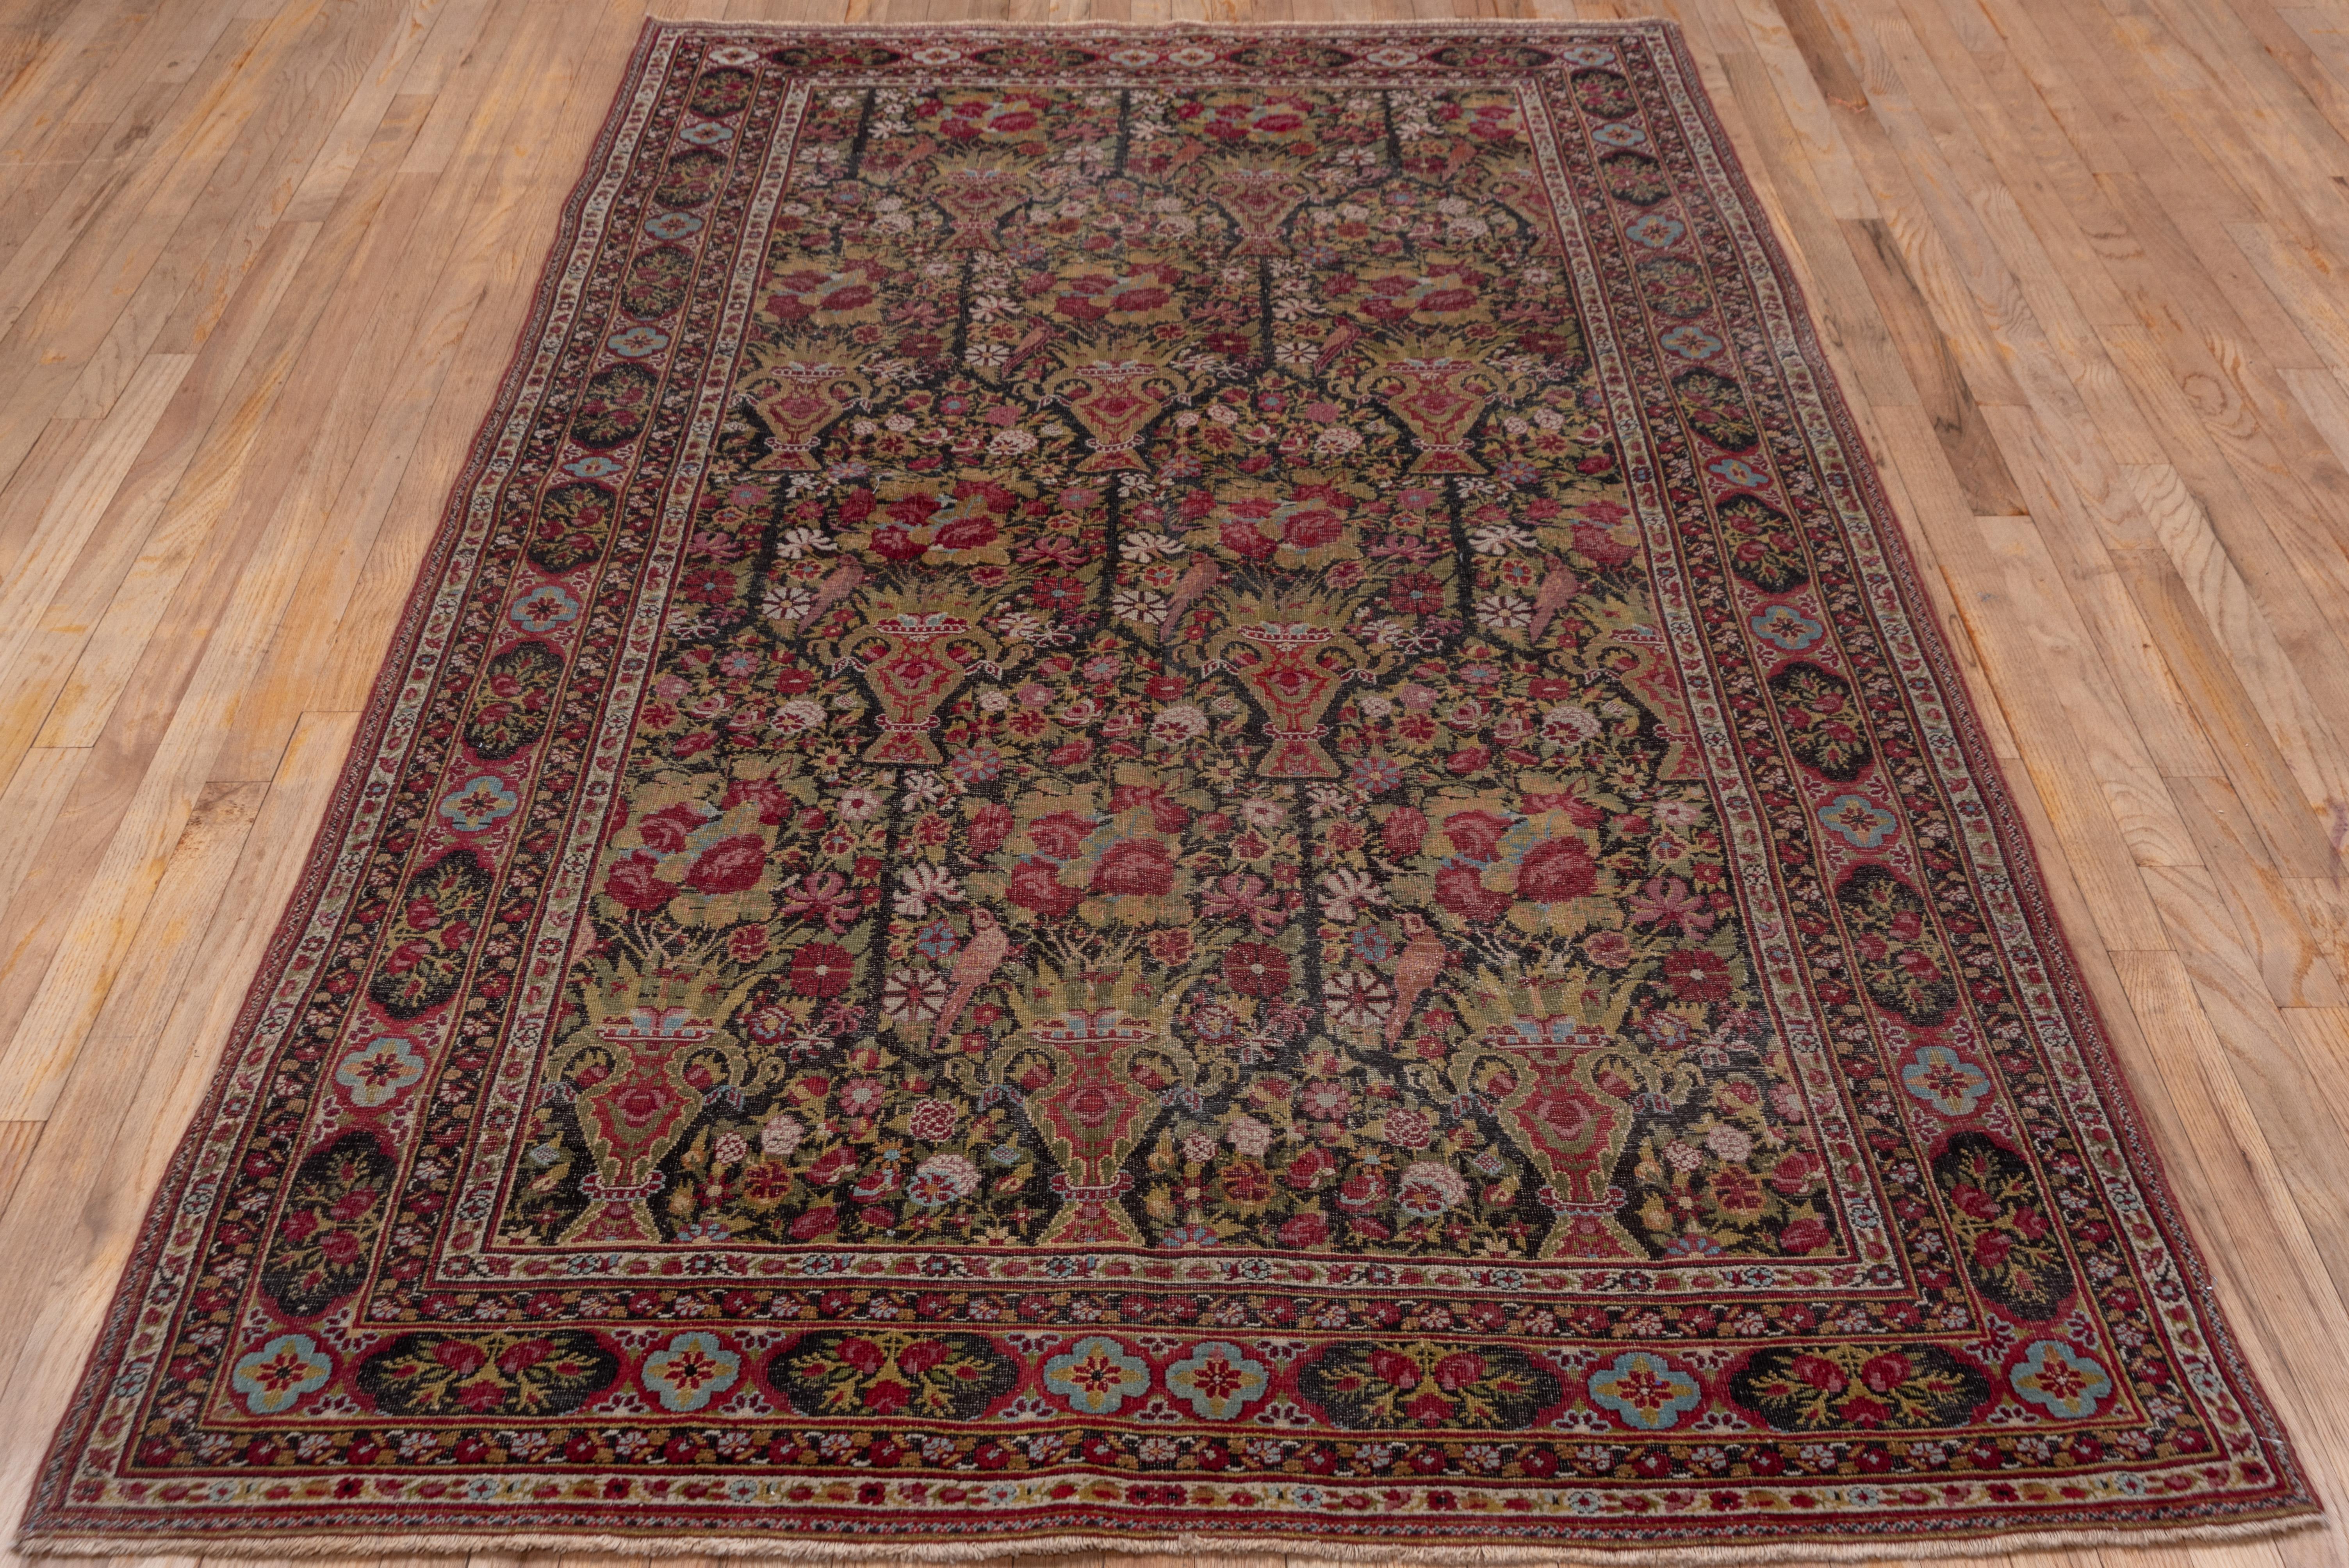 Late 19th Century Finely Woven Antique Indian Agra Rug, Vase Design Field, Wine & Chartreuse Tones For Sale